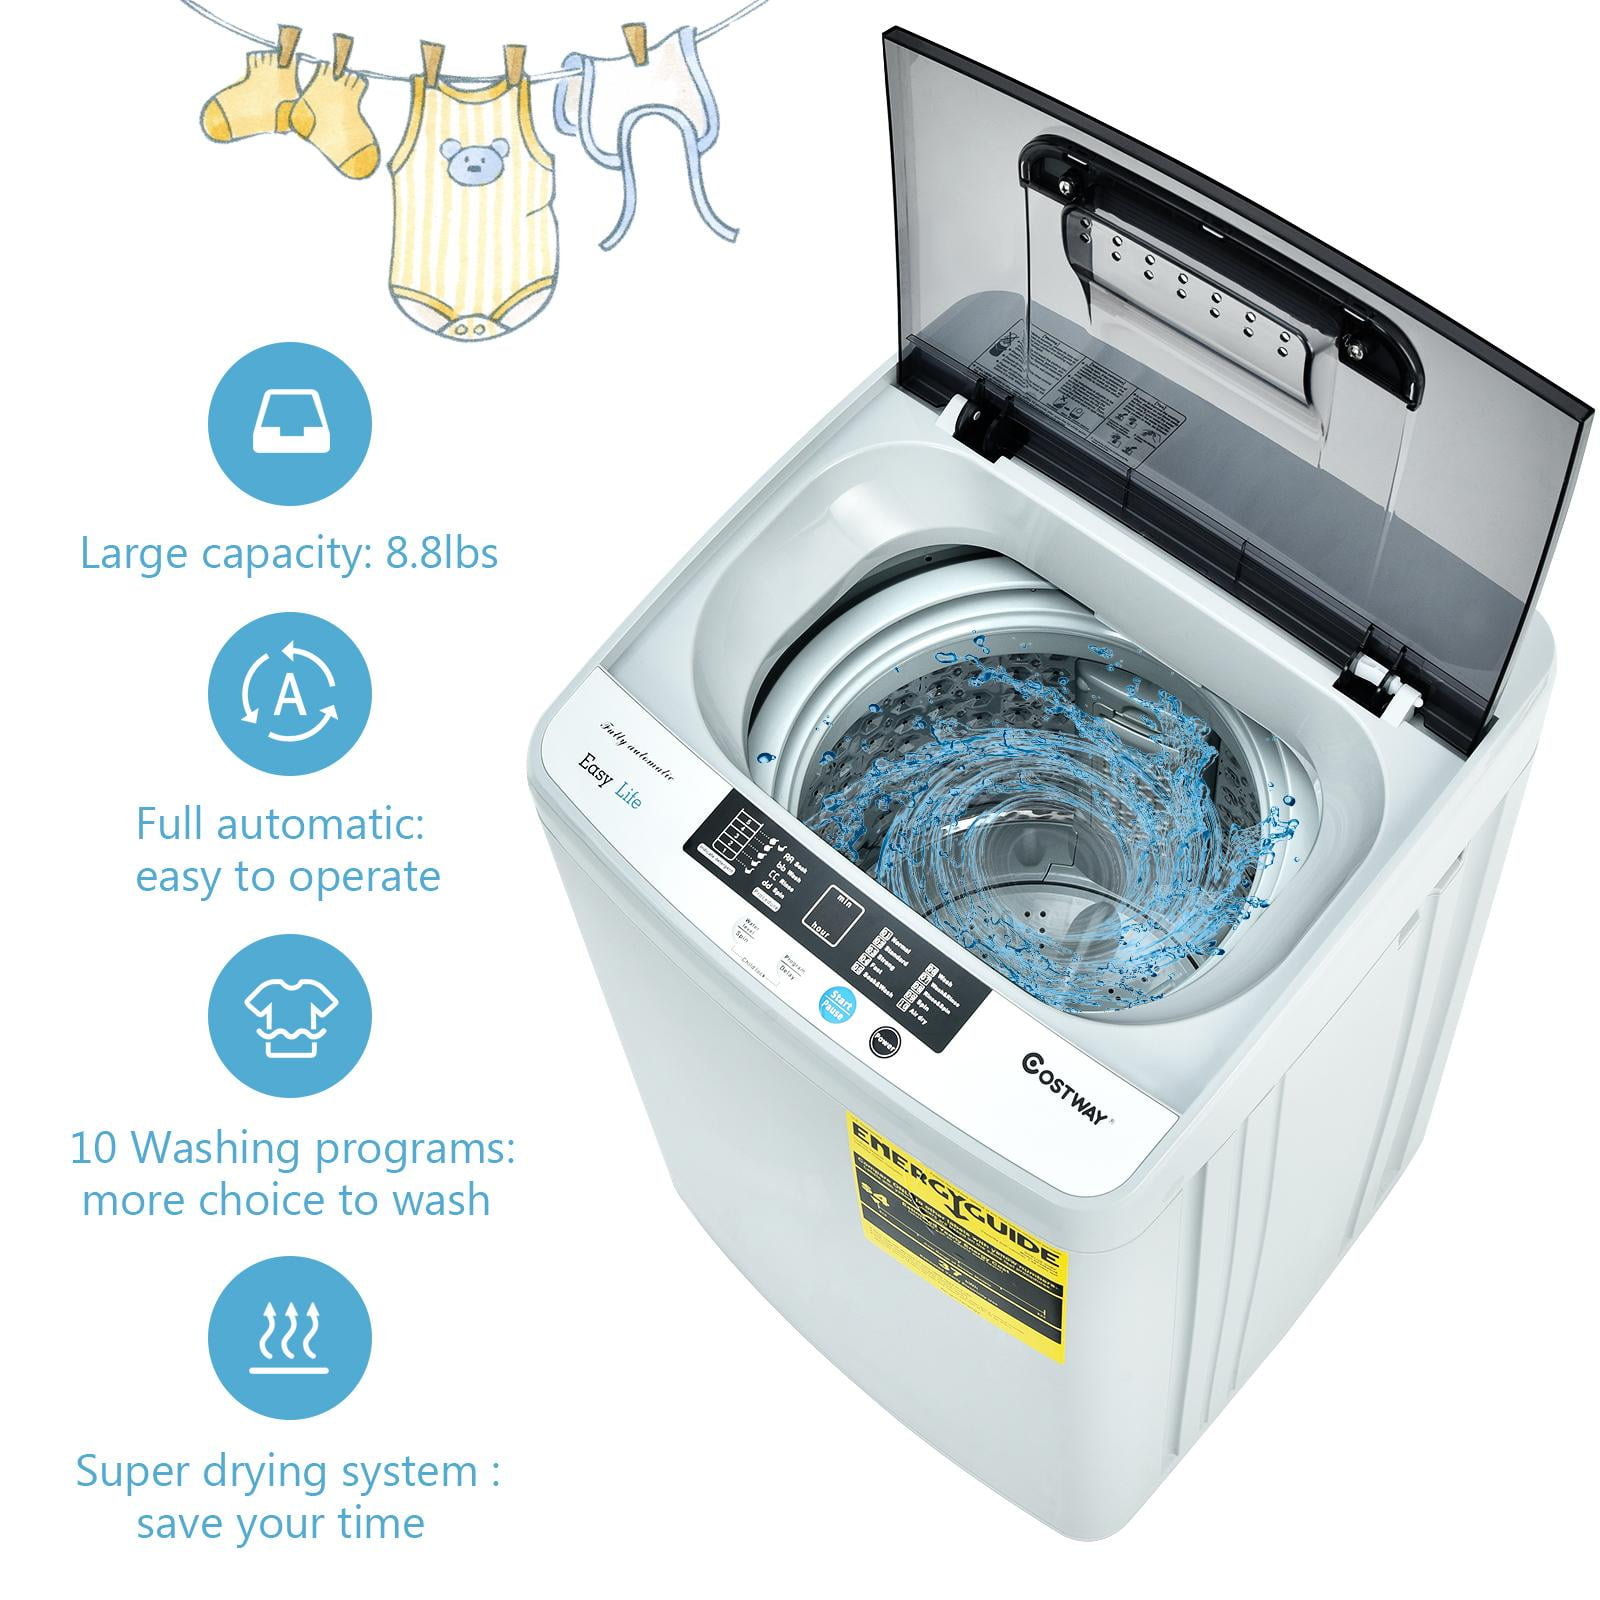 Giantex Portable Washing Machine 26lbs Capacity 18 lbs Washing 8 lbs Spinning Blue & White w/Timer Control Built-in Drain Pump Dorm Apartment Semi-Automatic Laundry Twin Tub Mini Washer 2 in 1 Washer and Spinner Combo 